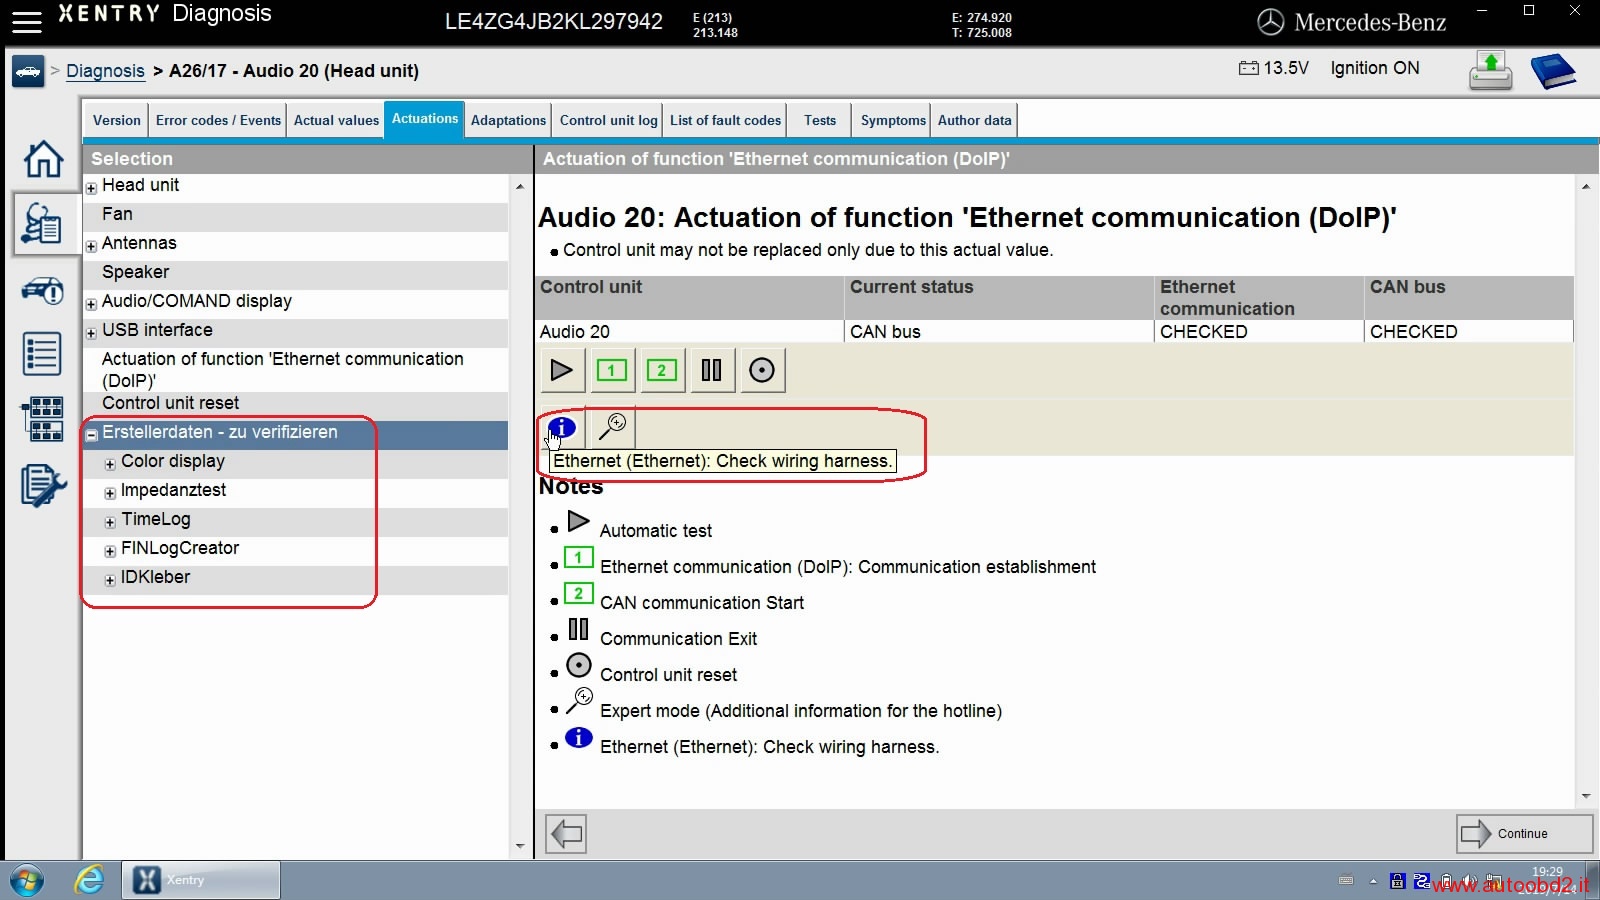 sdc4-plus-xentry-test-actuation-of-function-ethernet-communication-doip-19